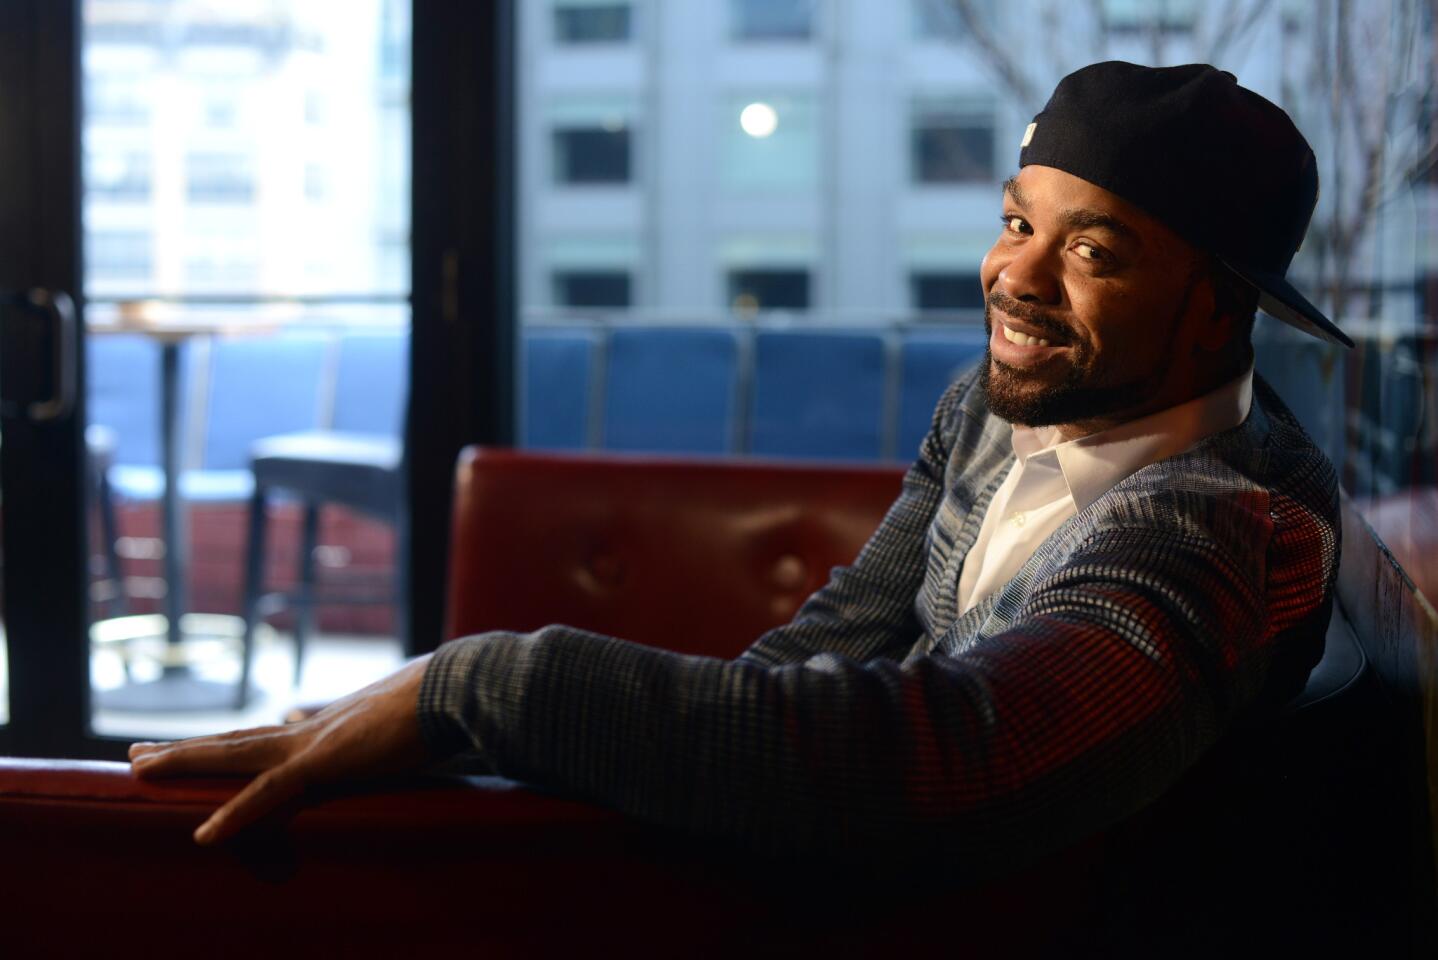 Hip hop recording artist, record producer and actor, Clifford Smith, aka Method Man, of the Wu-Tang Clan, is seen at Catch restaurant's rooftop in Manhattan, New York.